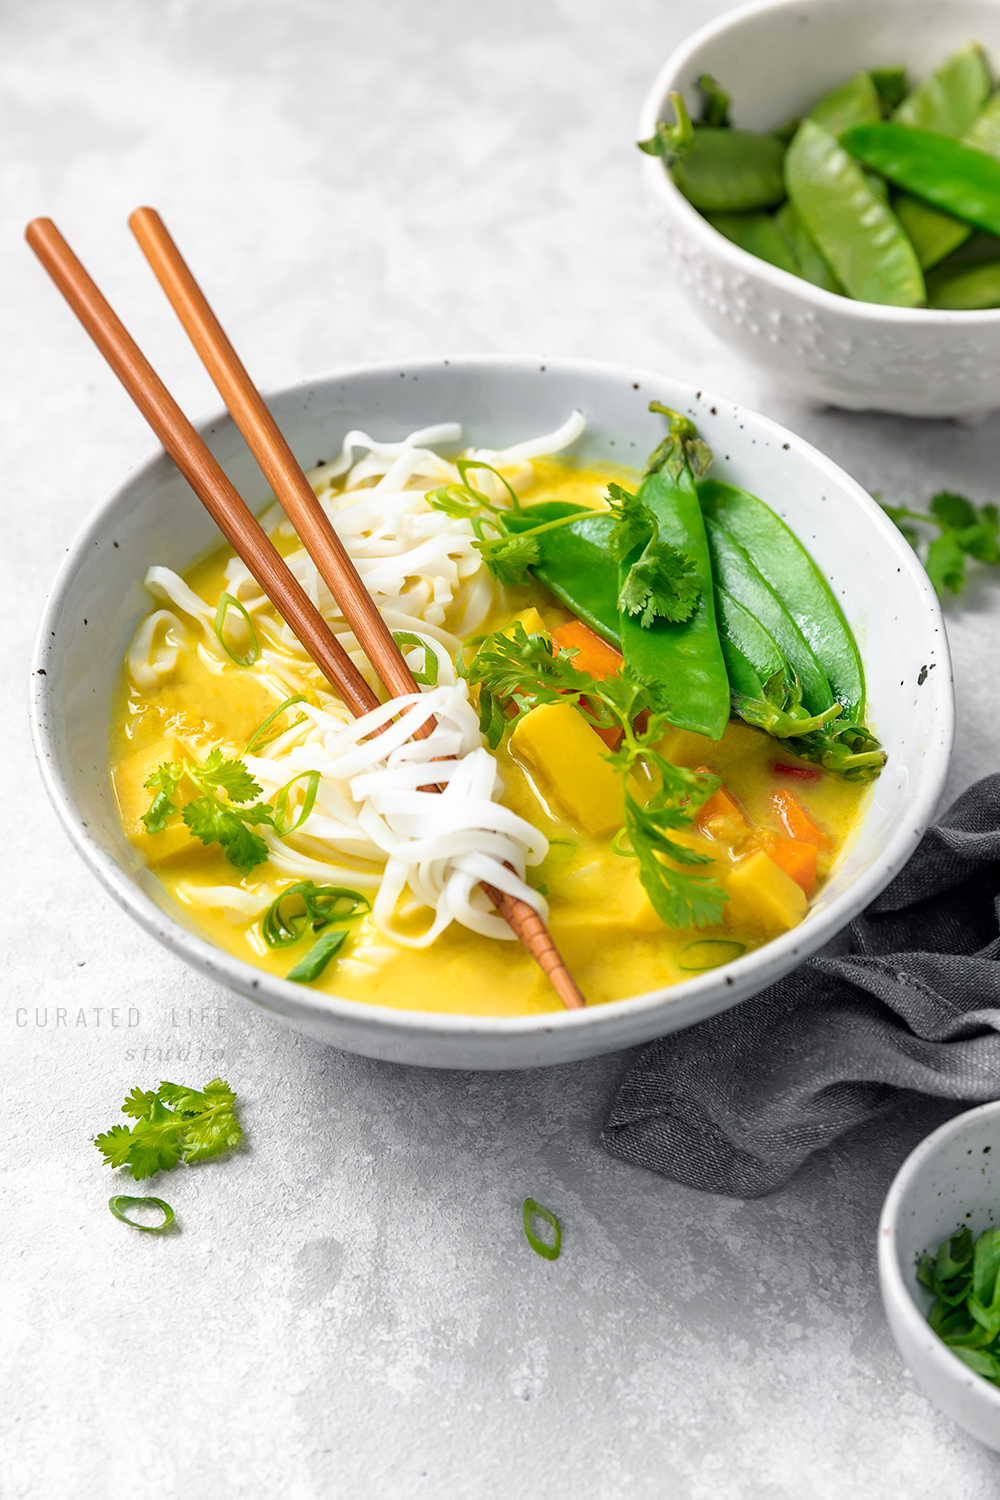 Delicious vegetable Coconut Curry Soup with potato & noodles.

#curry #soup #recipe #coconut #vegetarian #vegan #gluten-free #healthy